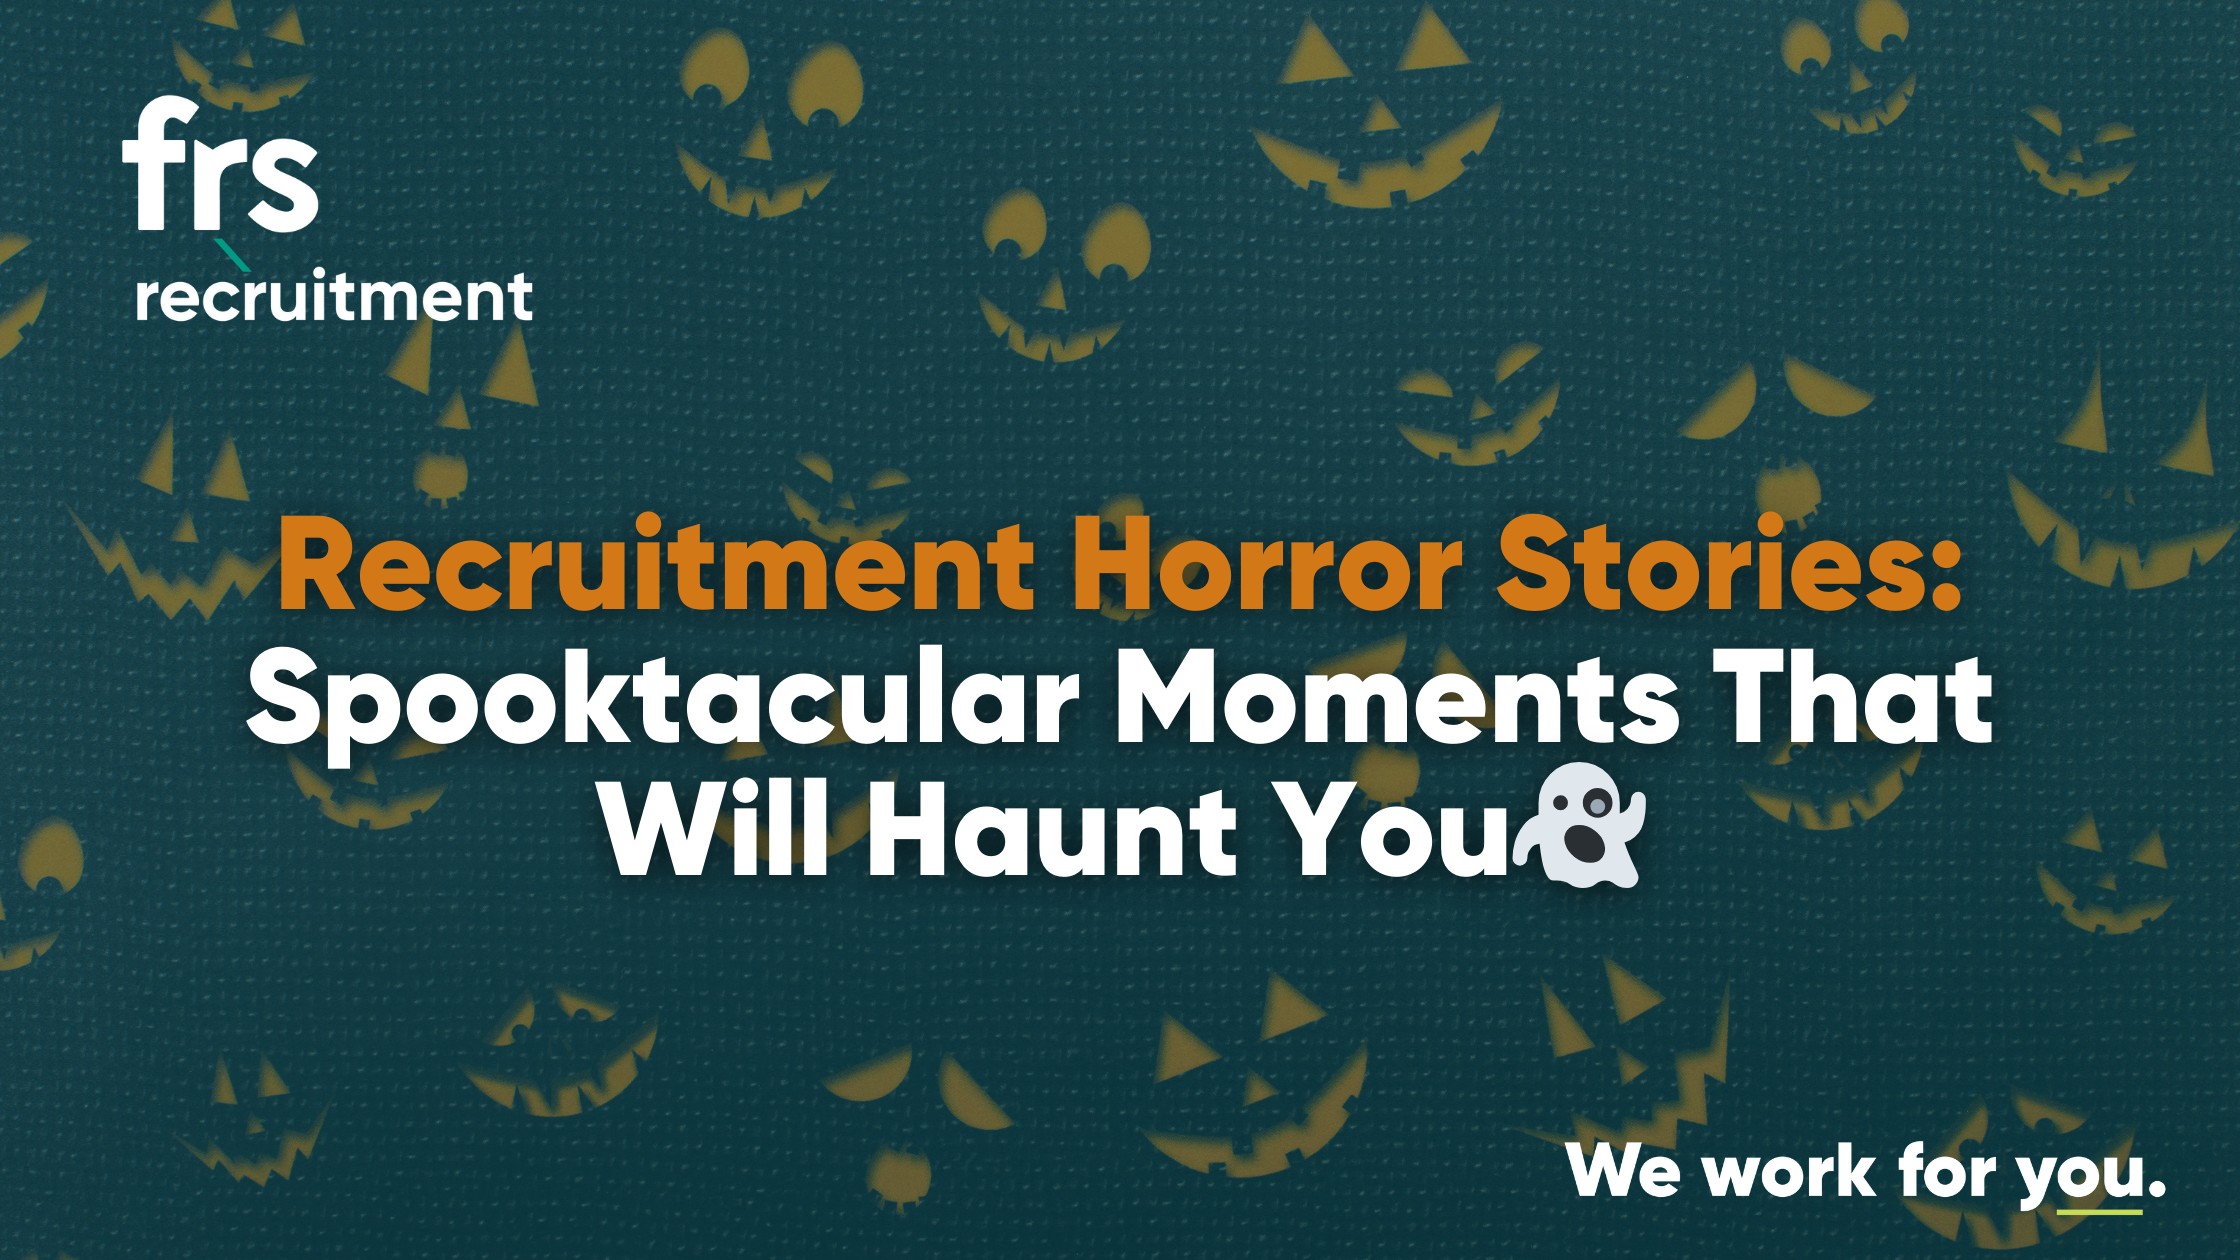 Recruitment Horror Stories: Spooktacular Moments That Will Haunt You👻